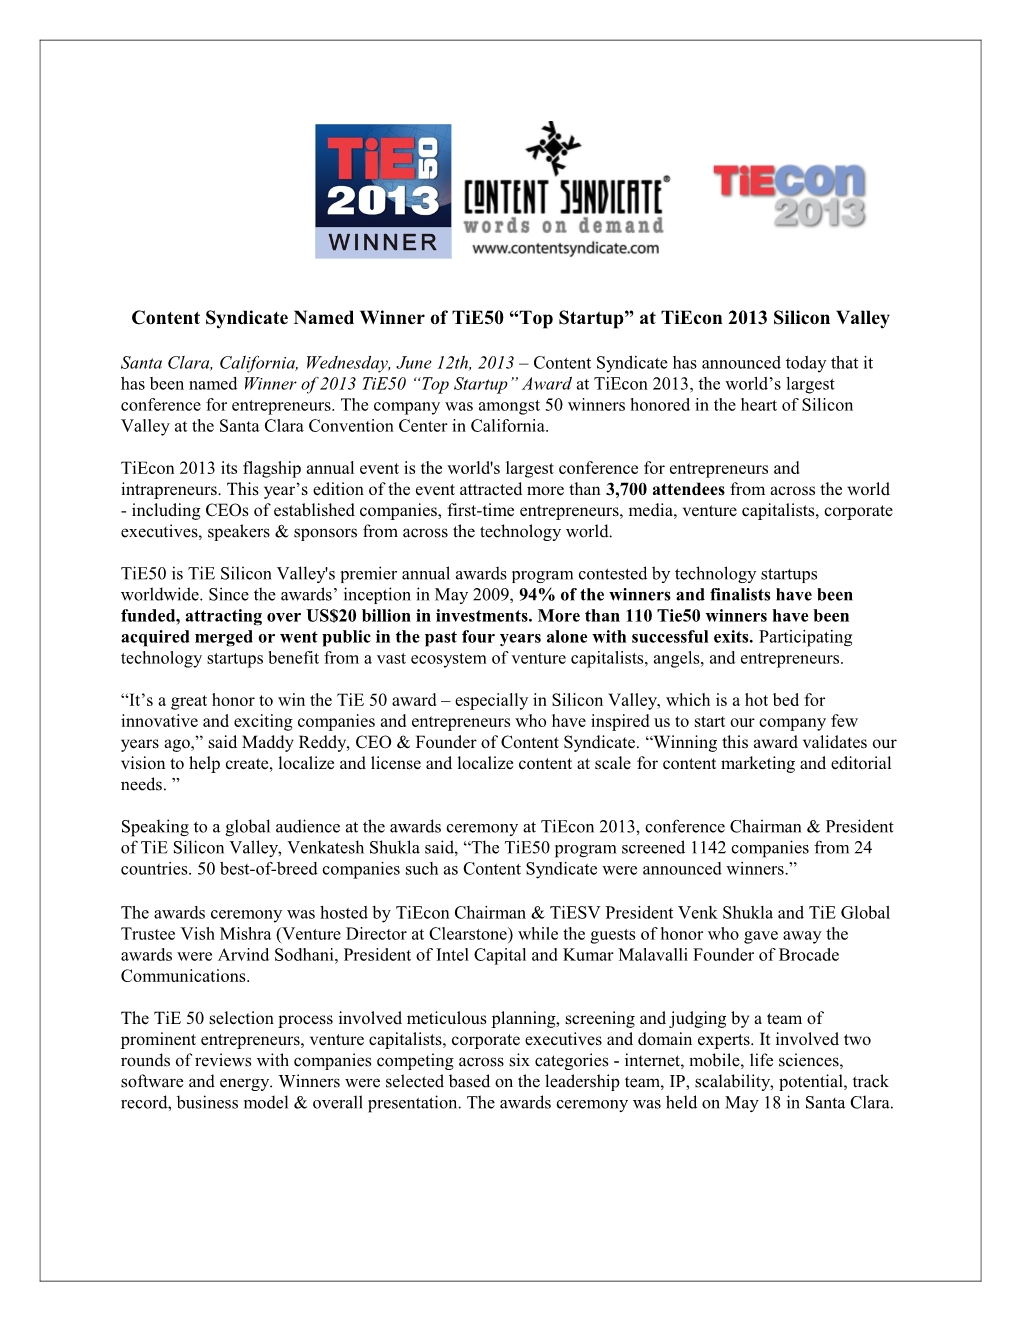 XXX Named Winner of 2013 Tie50 Top Startup at Tiecon 2013